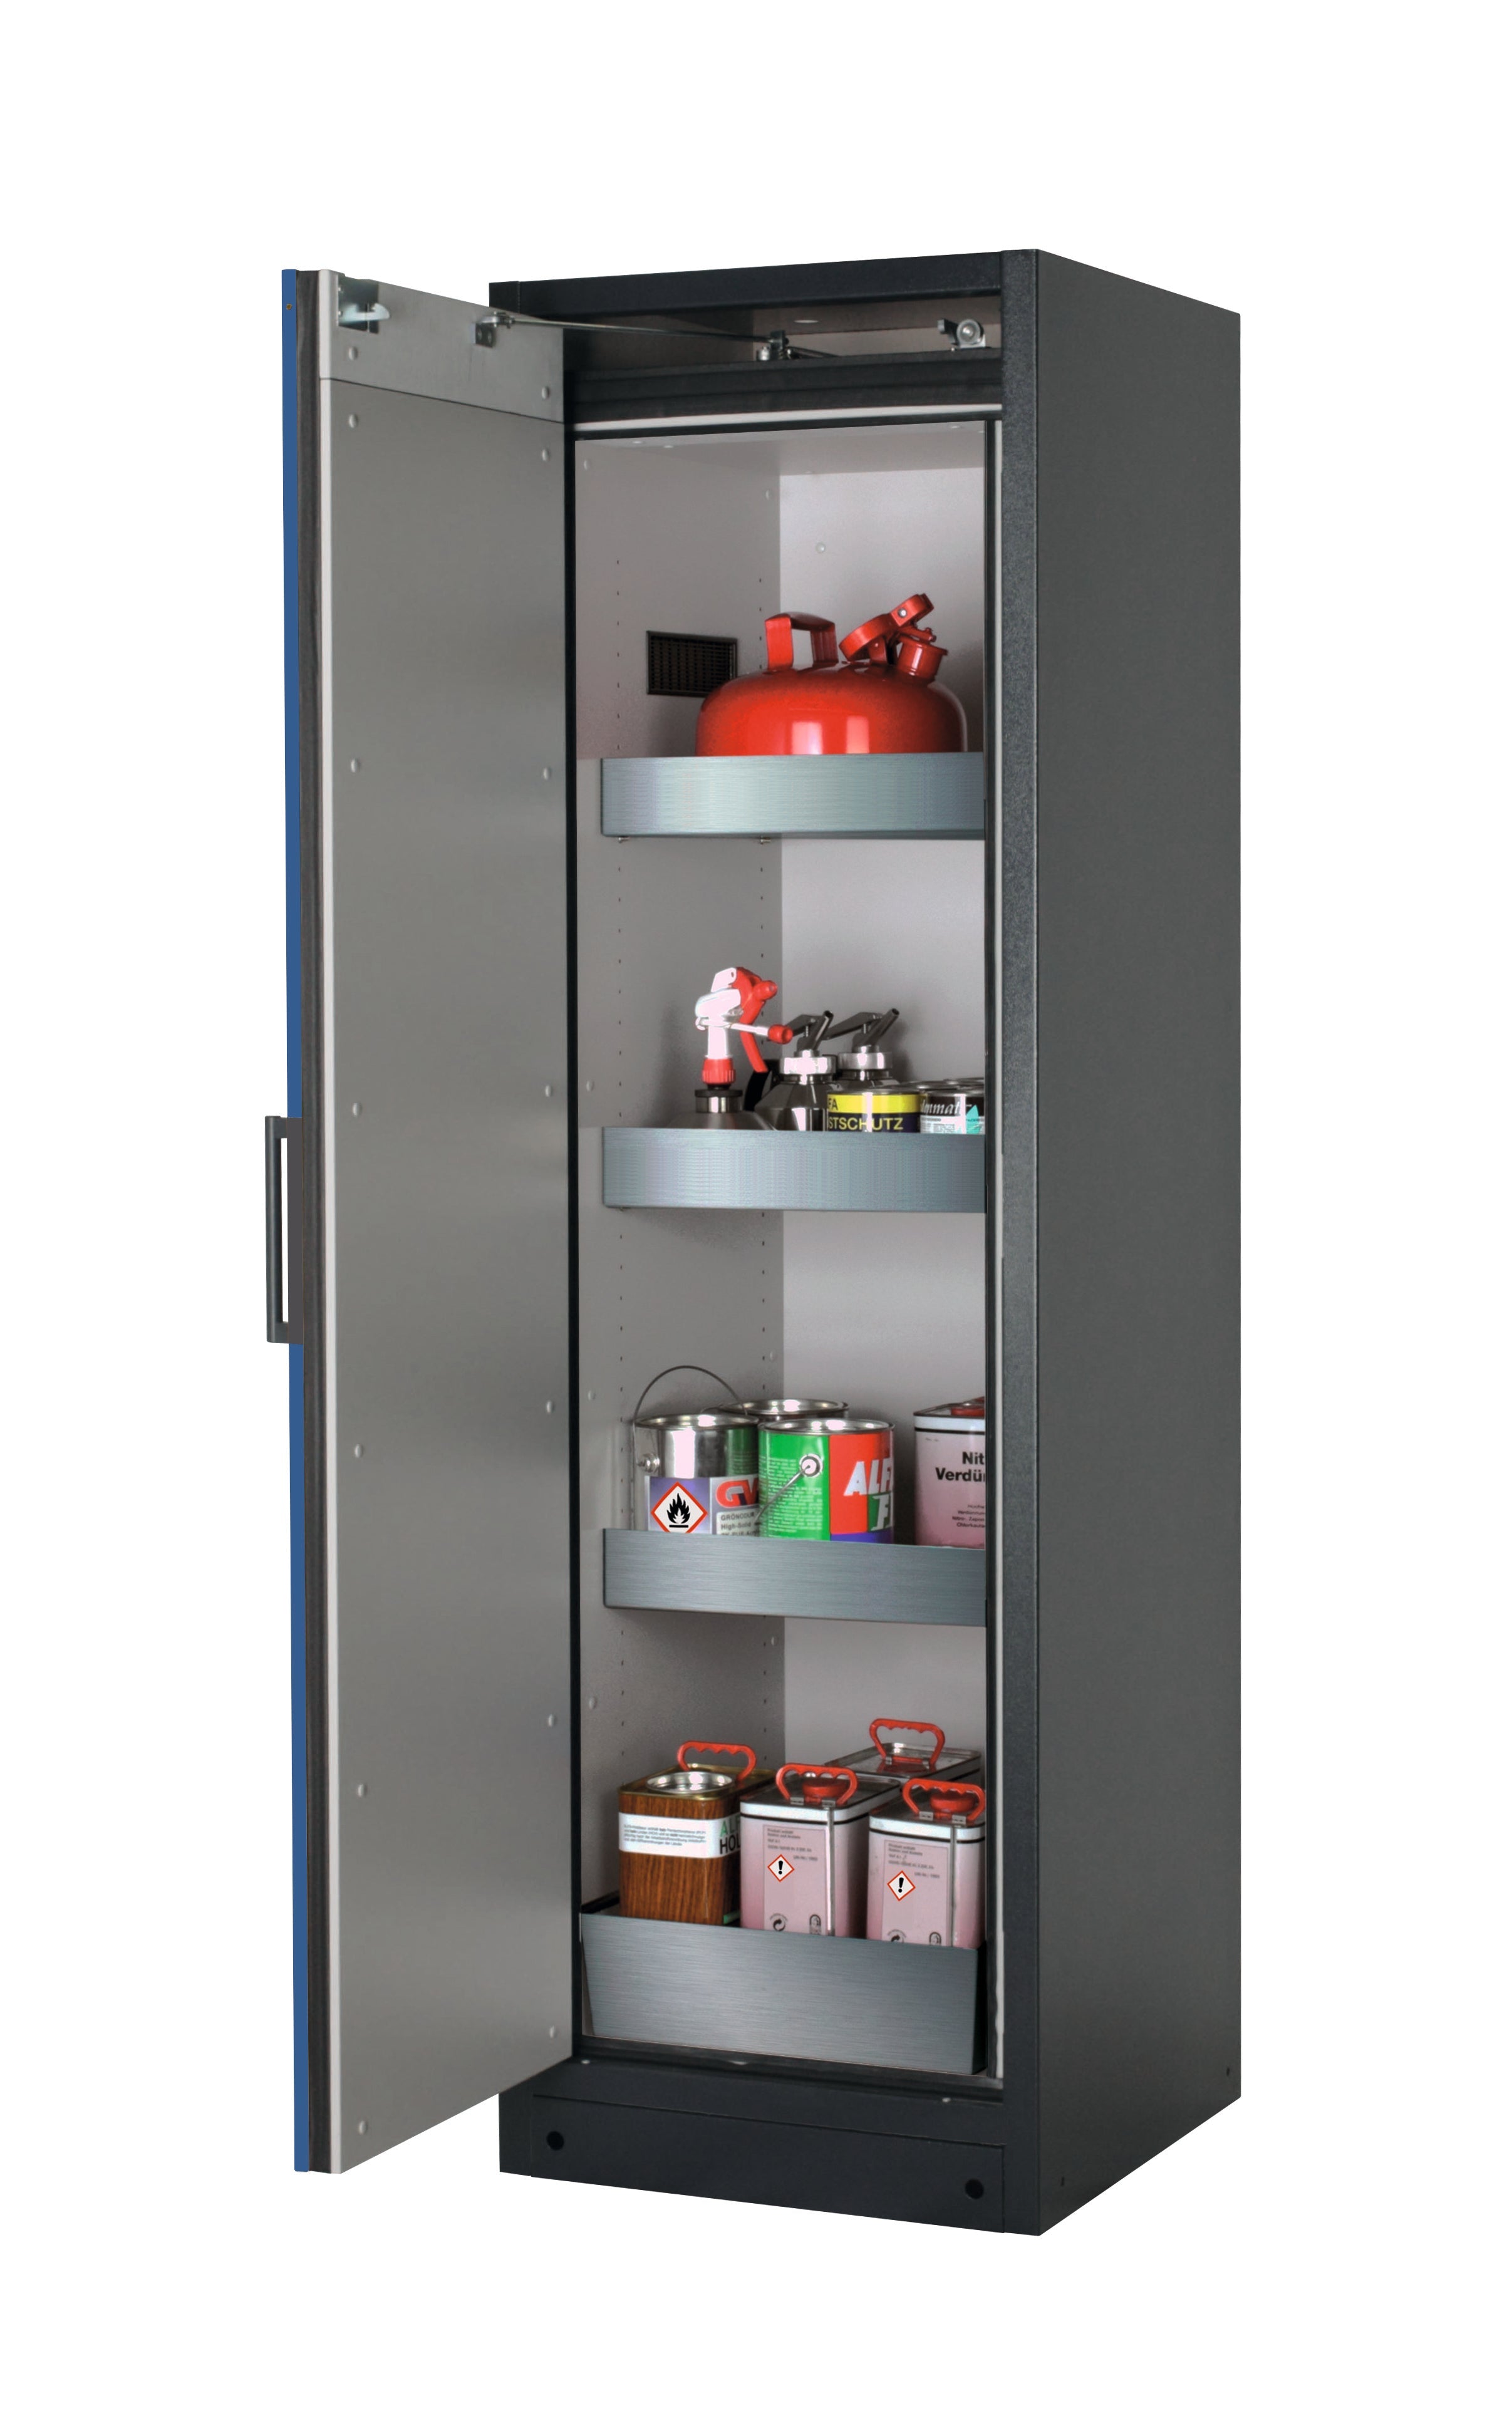 Type 90 safety storage cabinet Q-PEGASUS-90 model Q90.195.060.WDAC in gentian blue RAL 5010 with 3x tray shelf (standard) (stainless steel 1.4301),